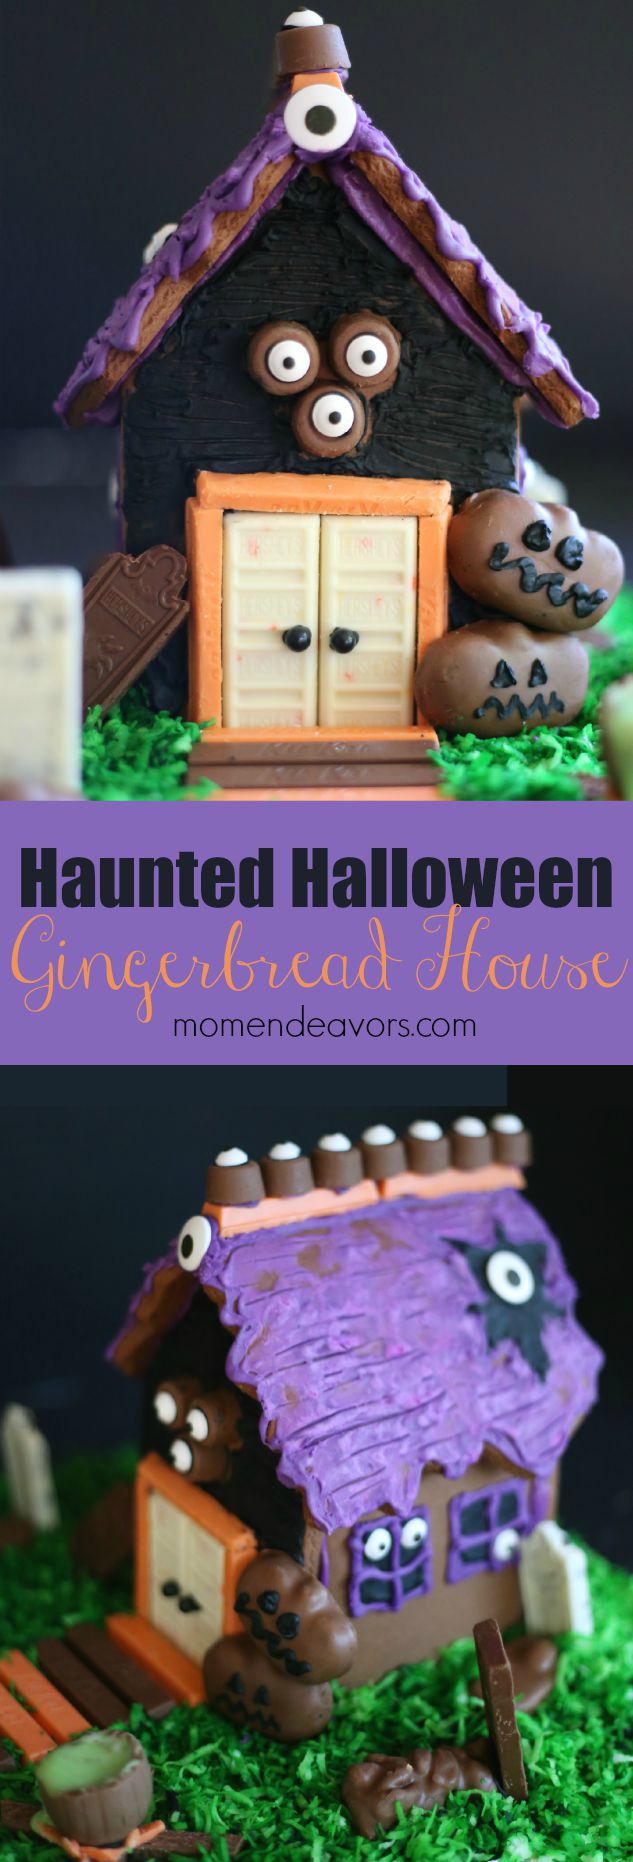 Halloween Candy Gingerbread House